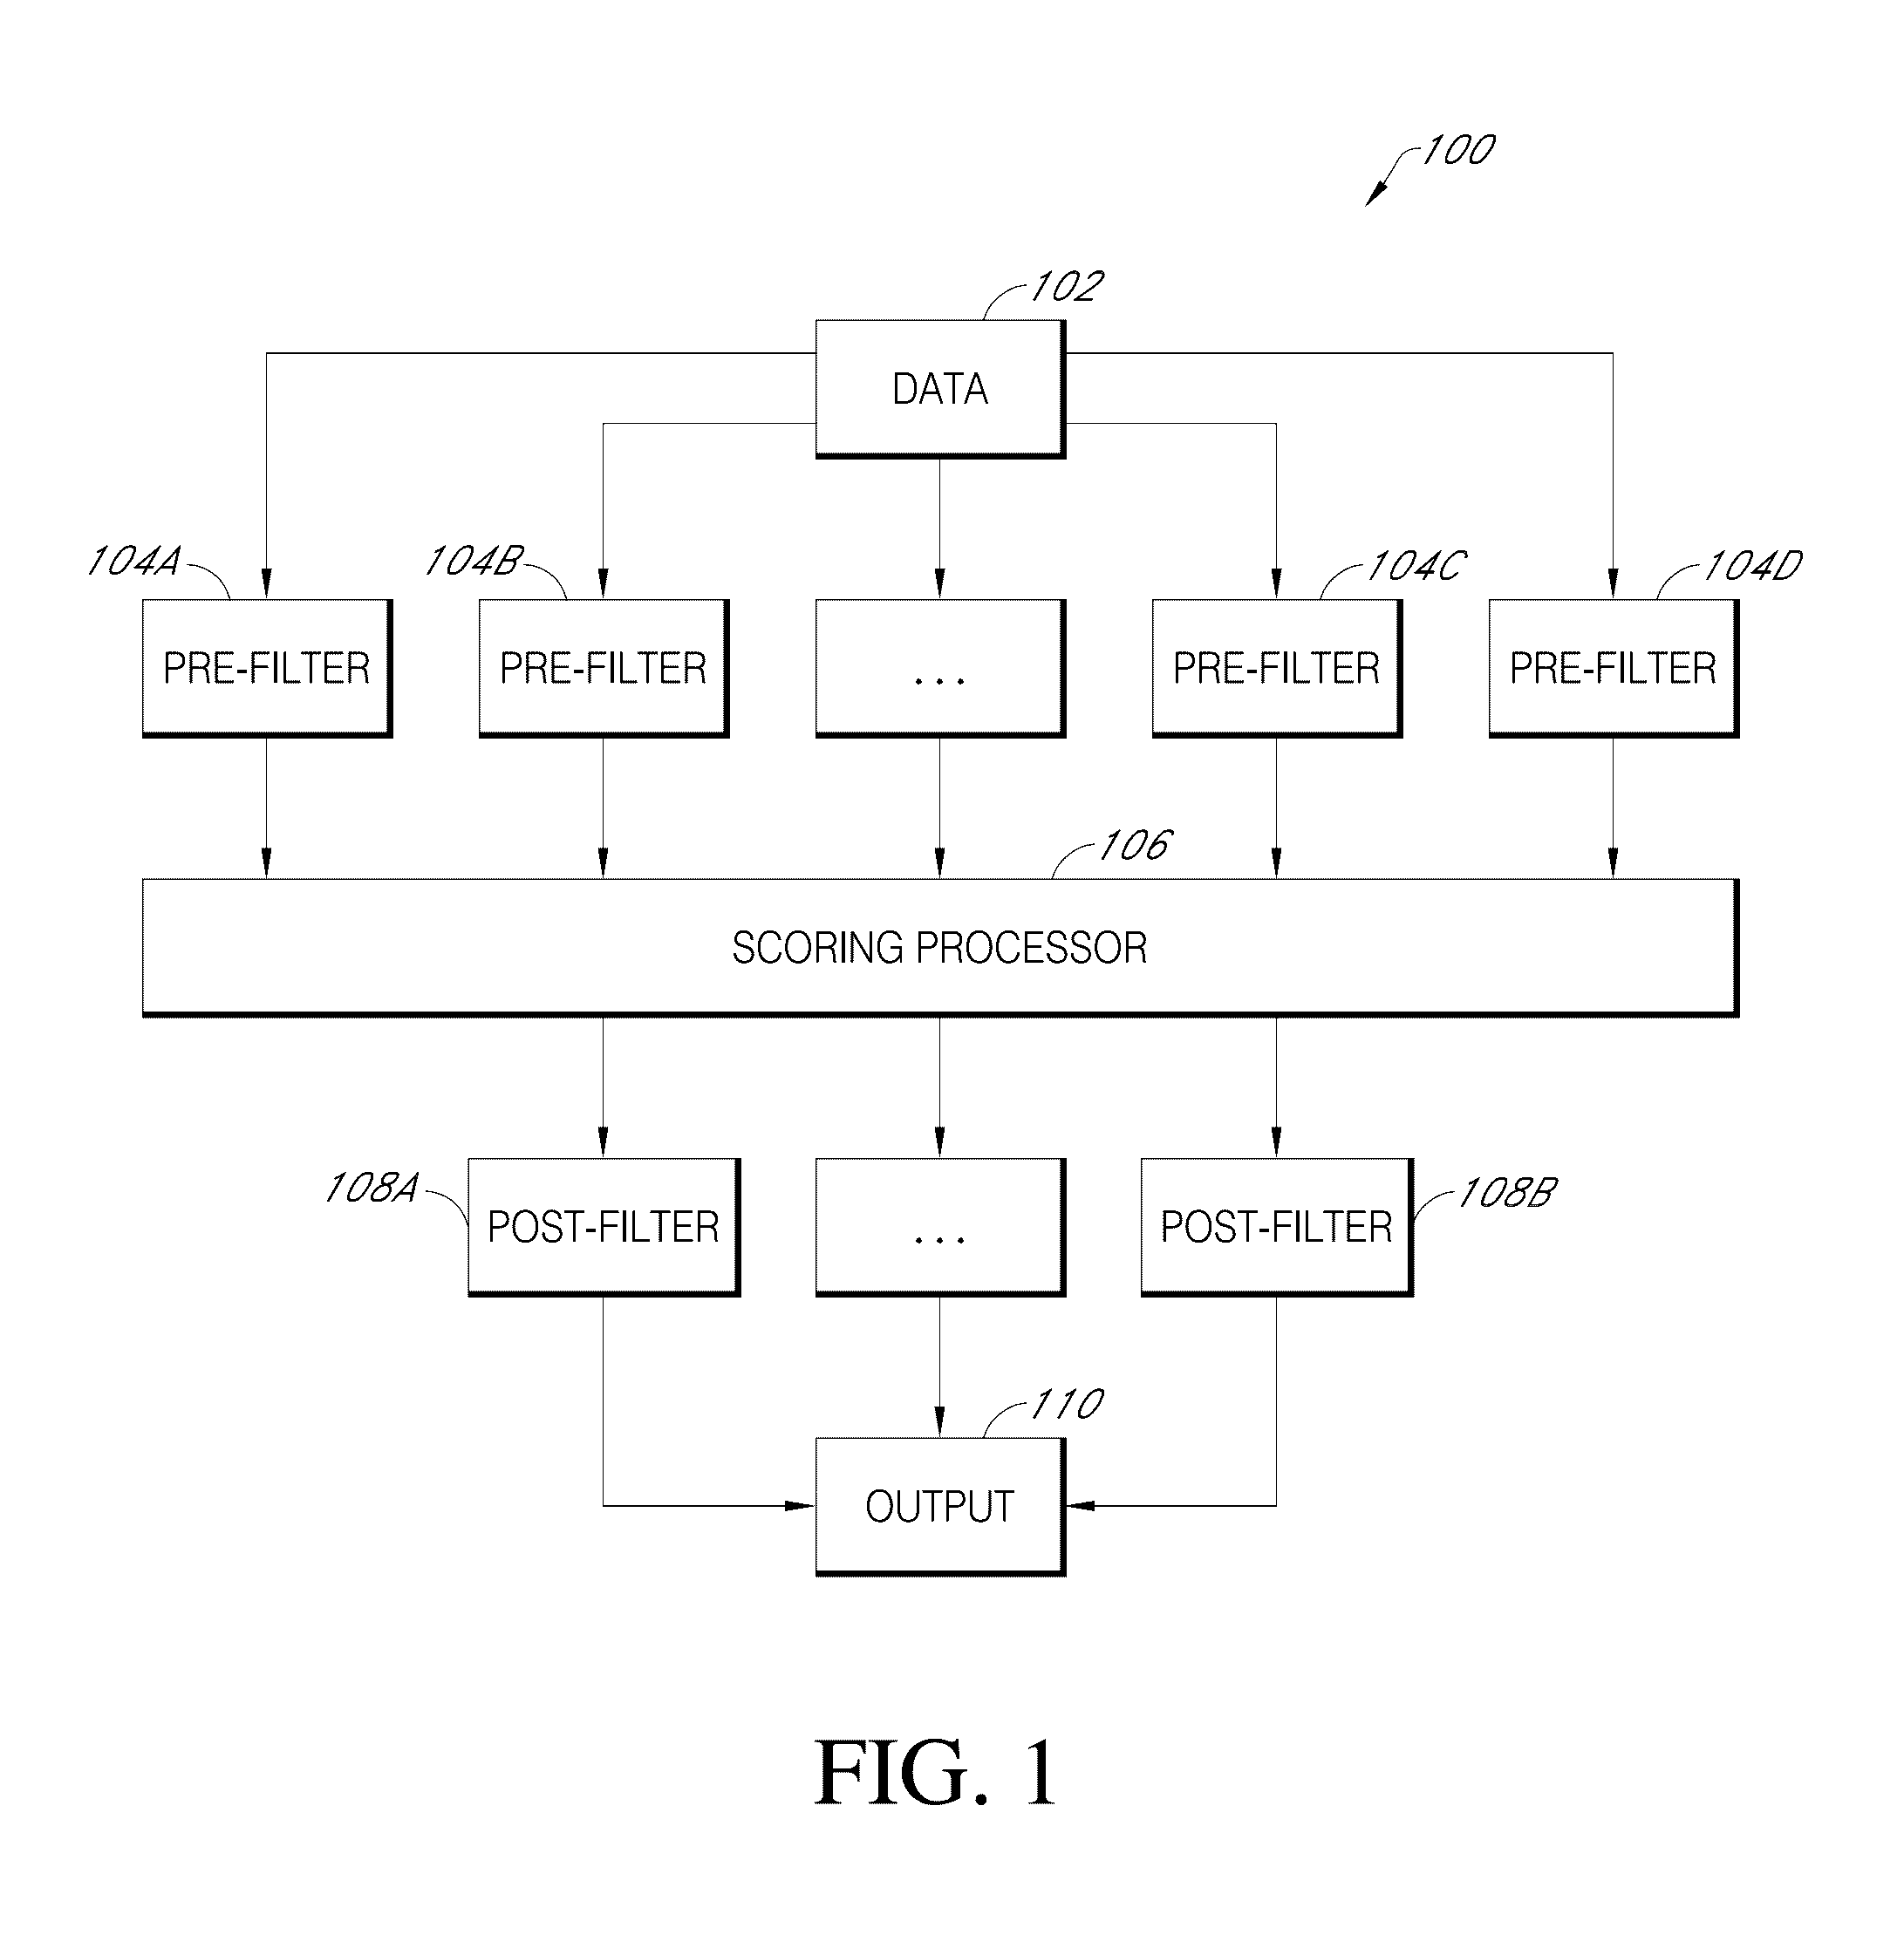 Malicious software detection in a computing system